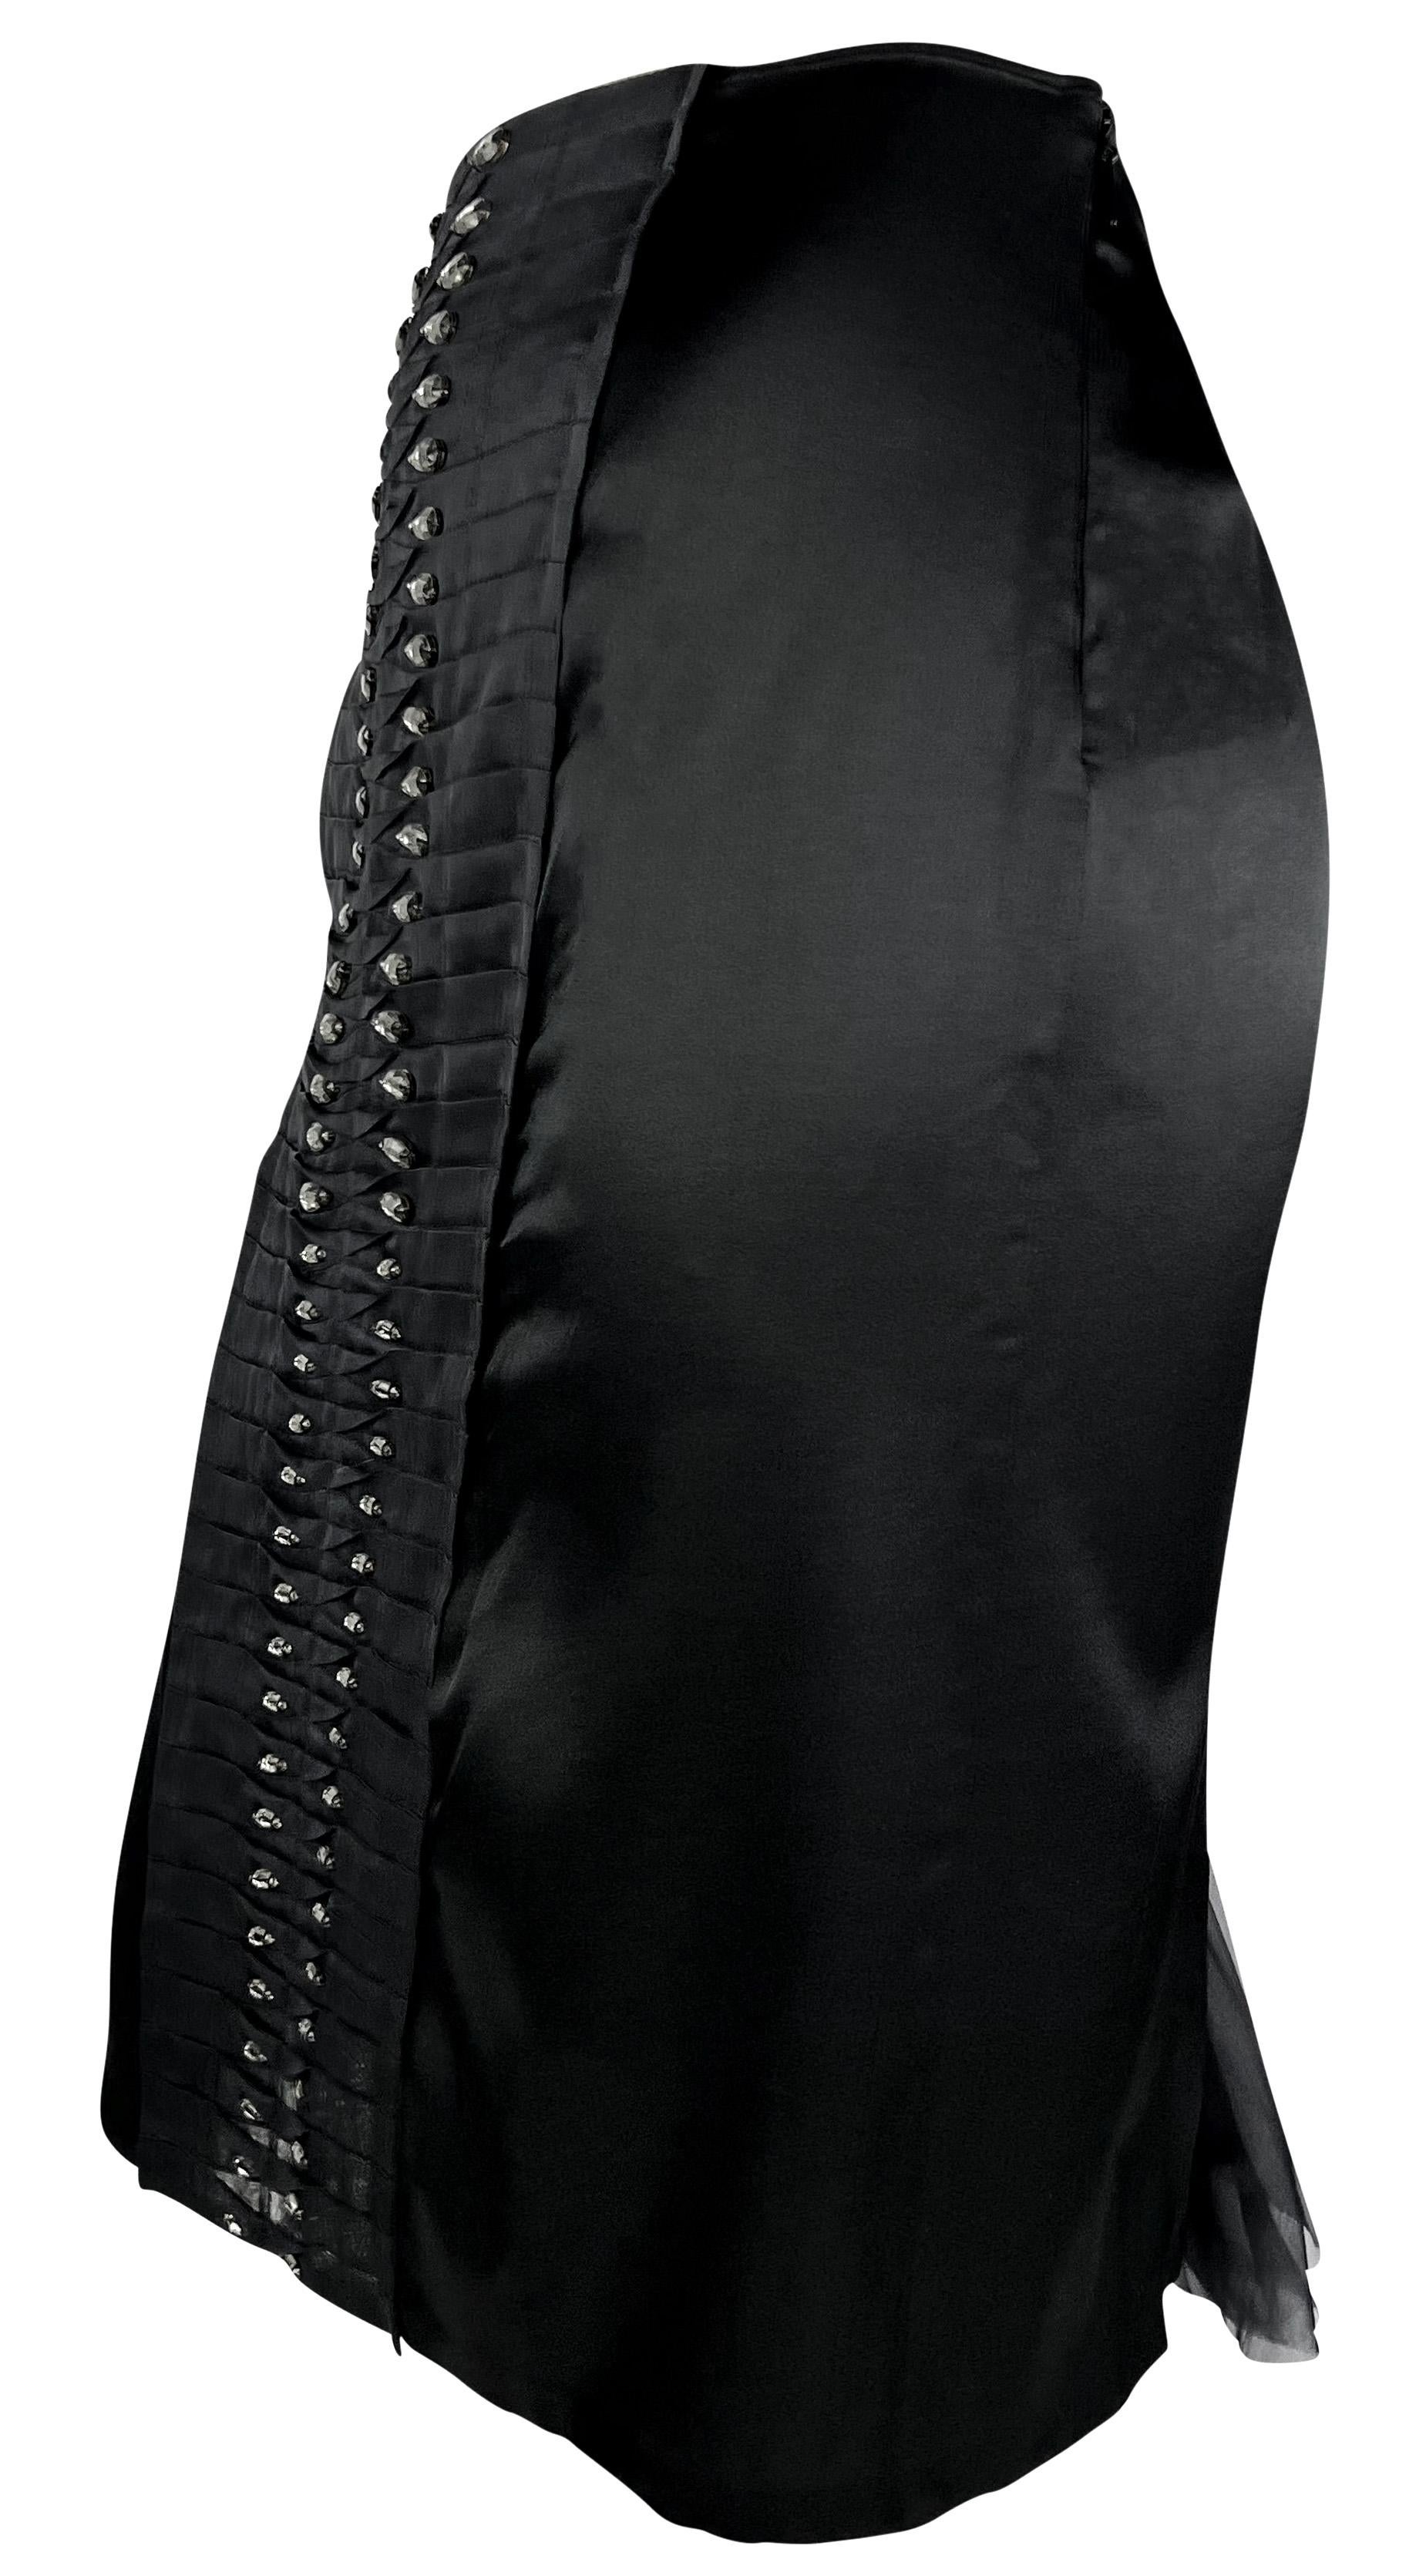 S/S 2004 Gucci by Tom Ford Runway Rhinestone Black Silk Pleated Bodycon Skirt For Sale 9